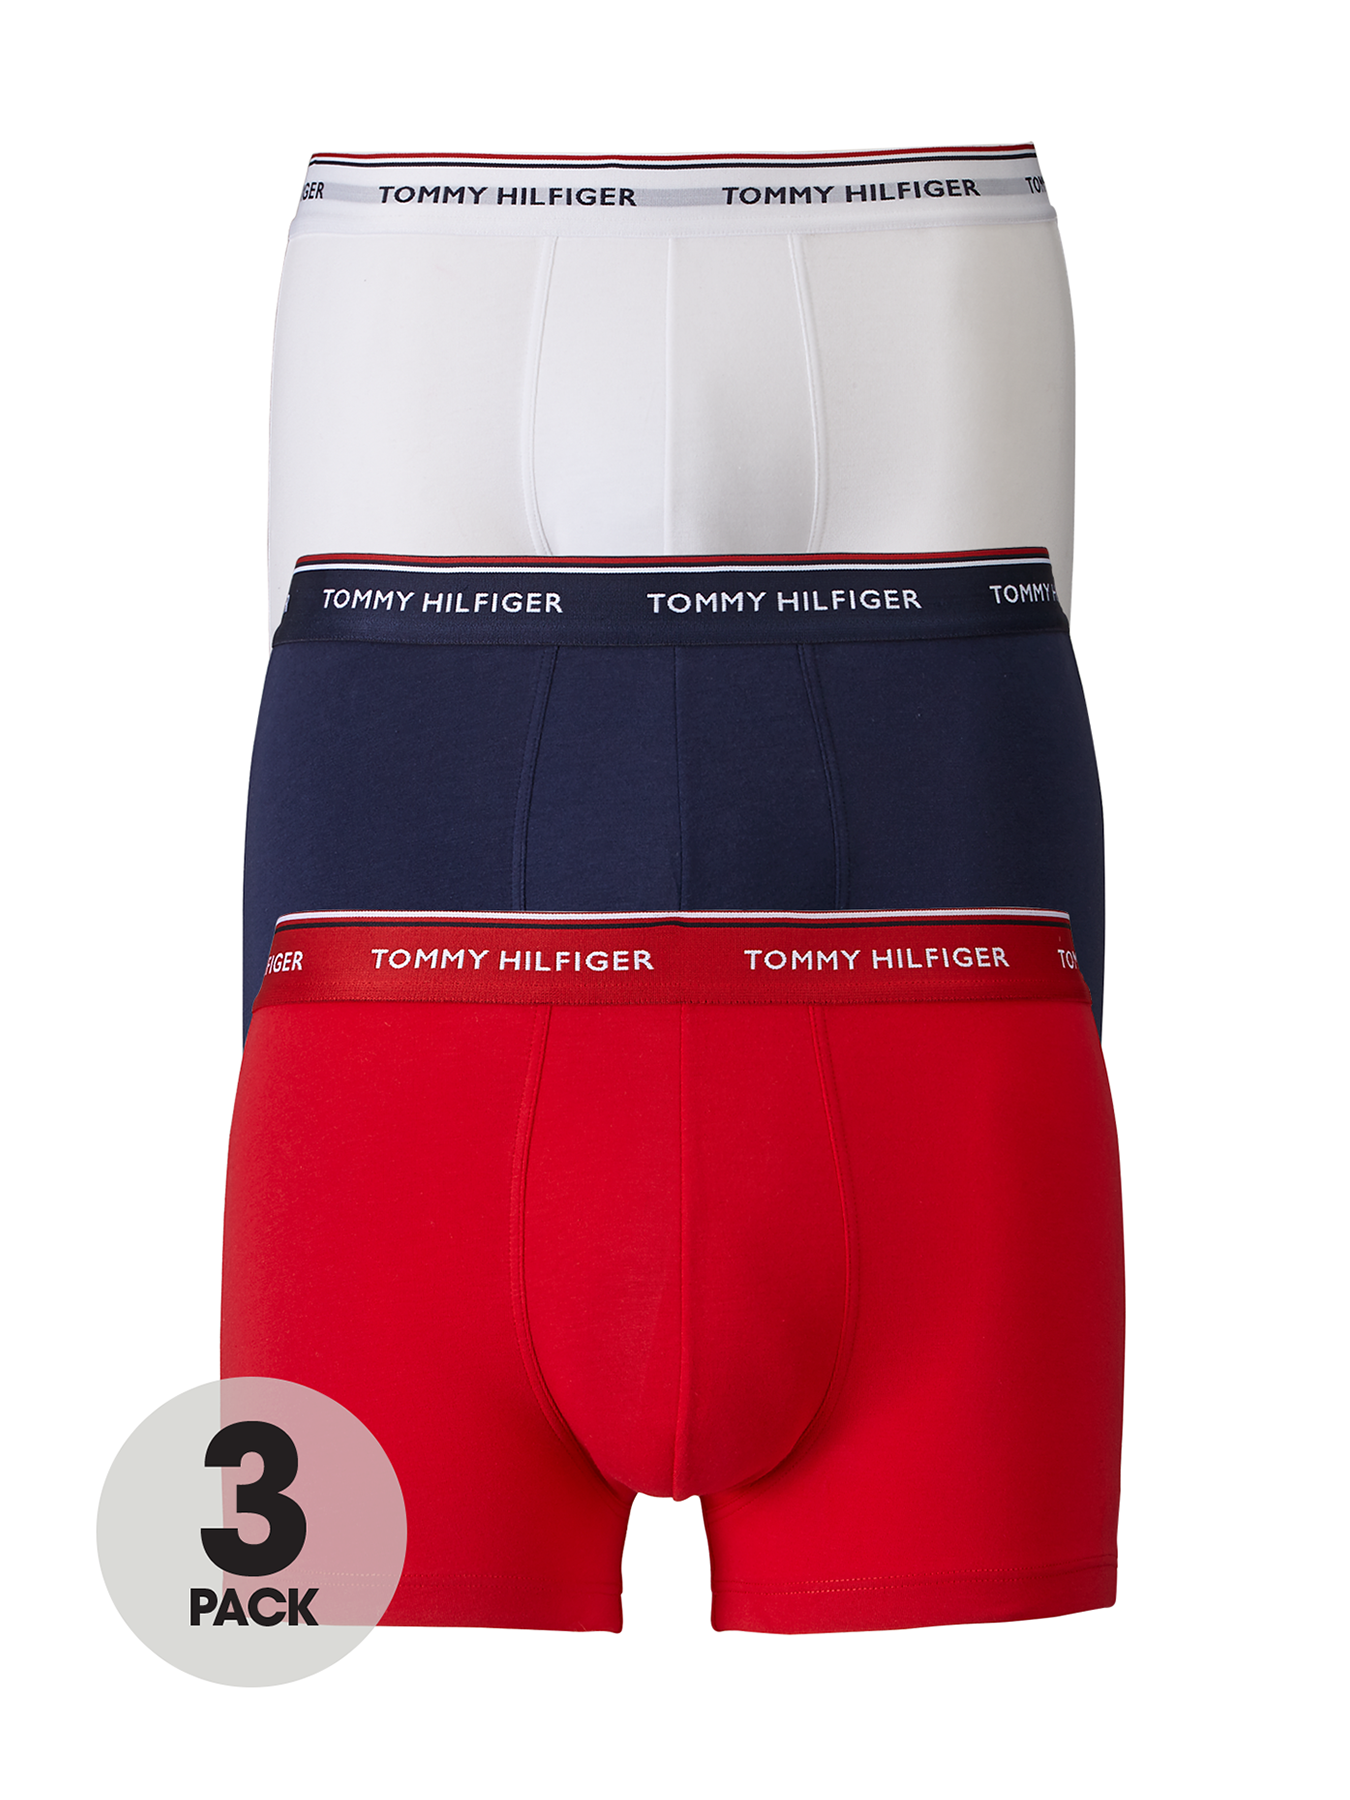 TOMMY HILFIGER 3-pack boxer shorts in white